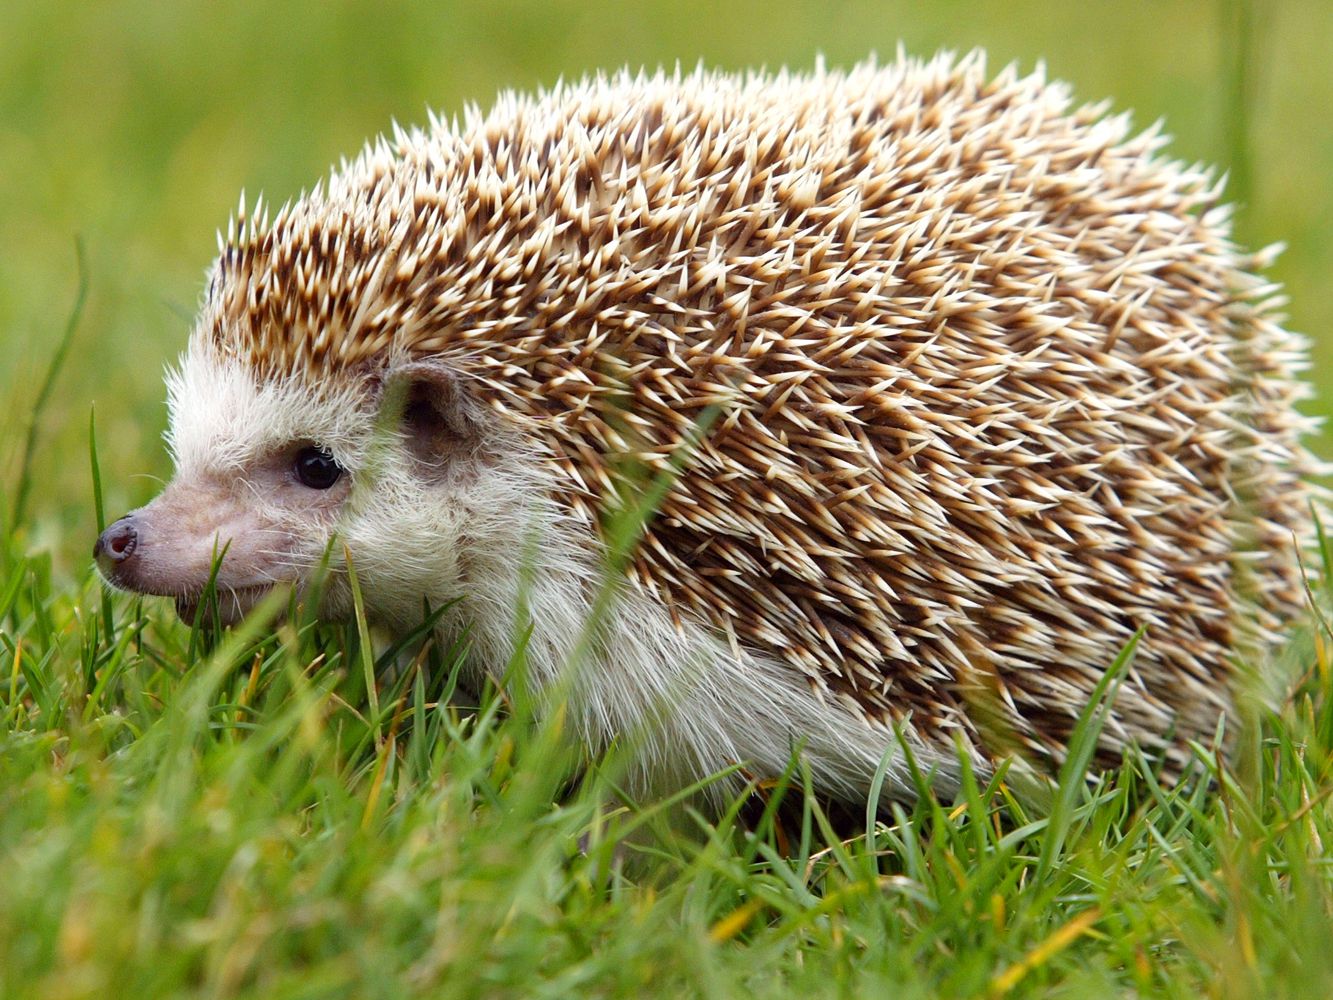 Are hedgehogs insectivores?